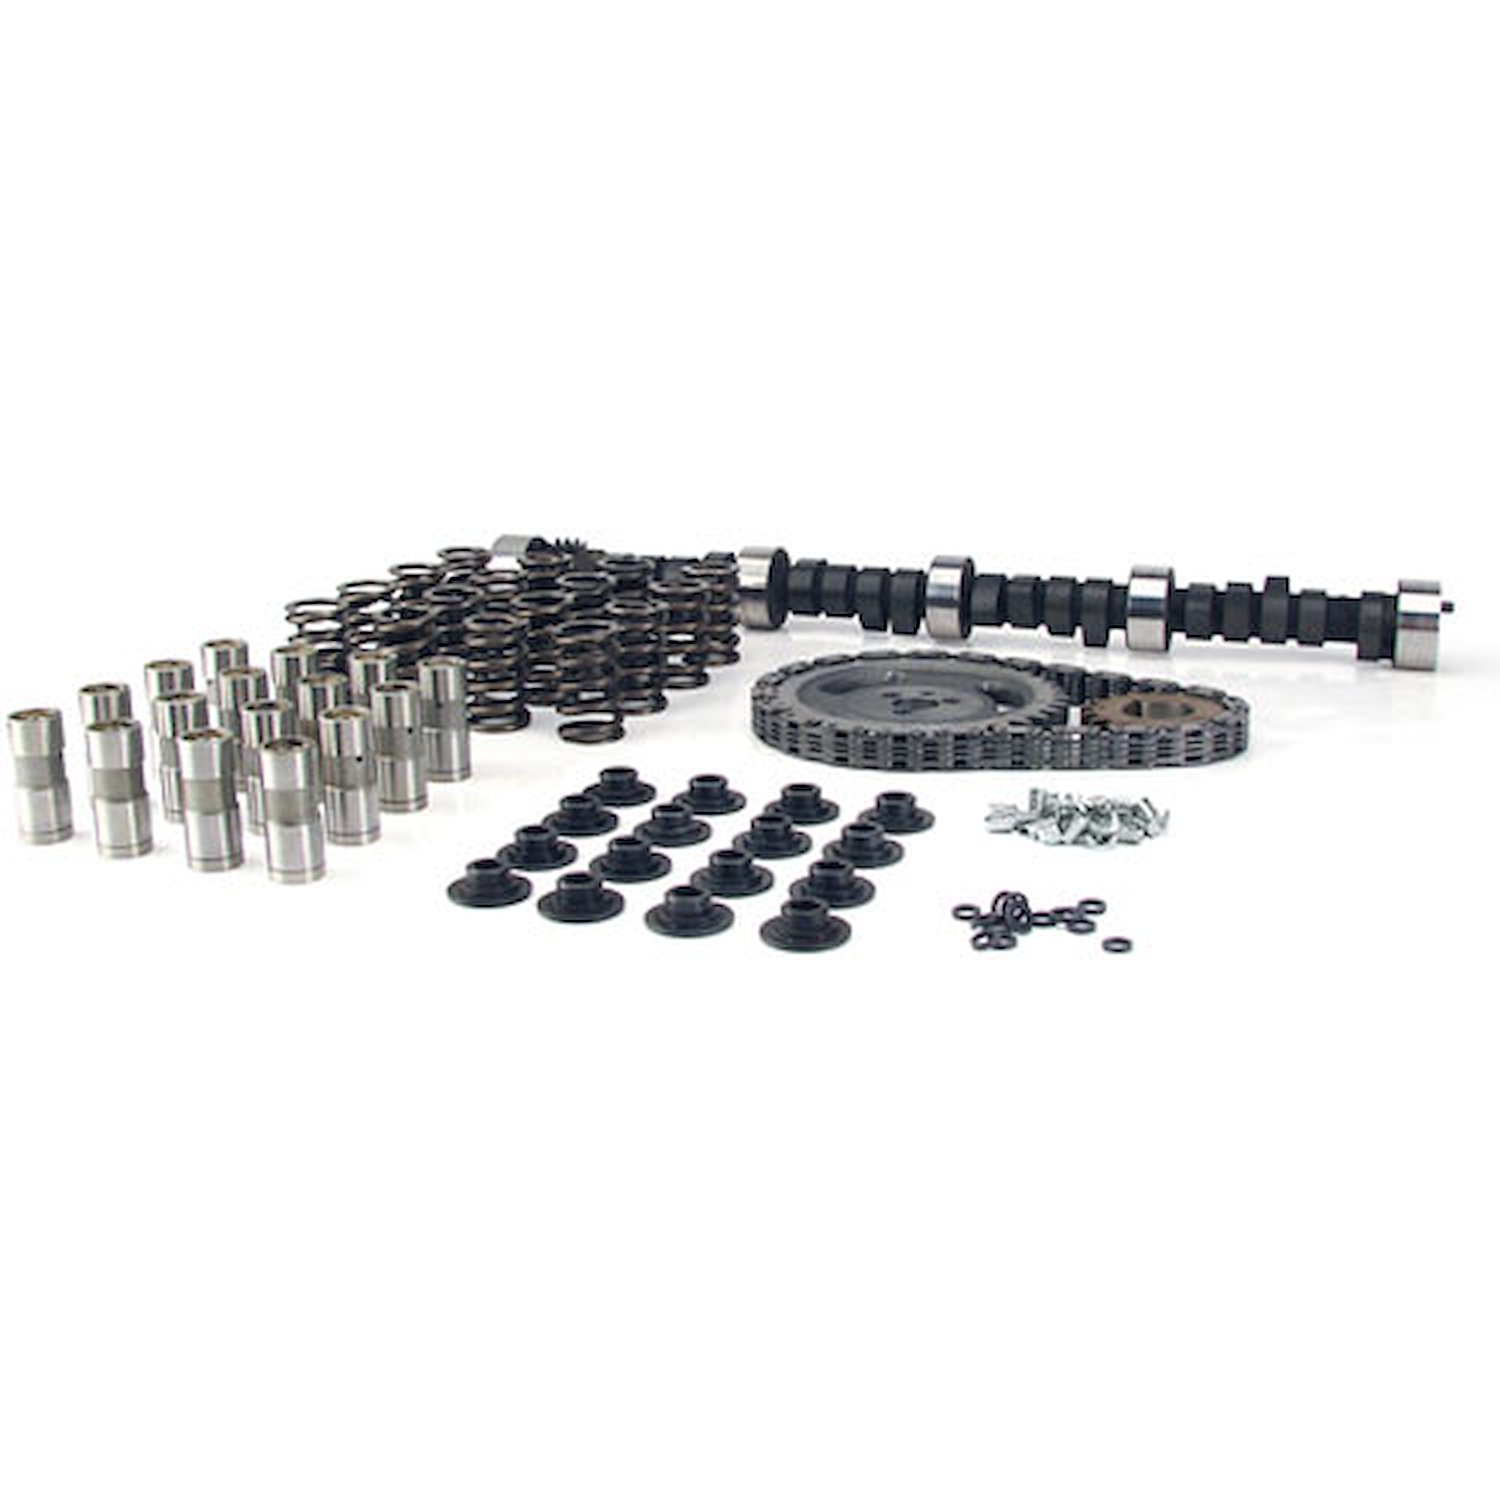 Extreme Energy 249H Hydraulic Flat Tappet Camshaft Complete Kit Lift: .434" /.444" Duration: 249°/260° RPM Range: 1000-5000